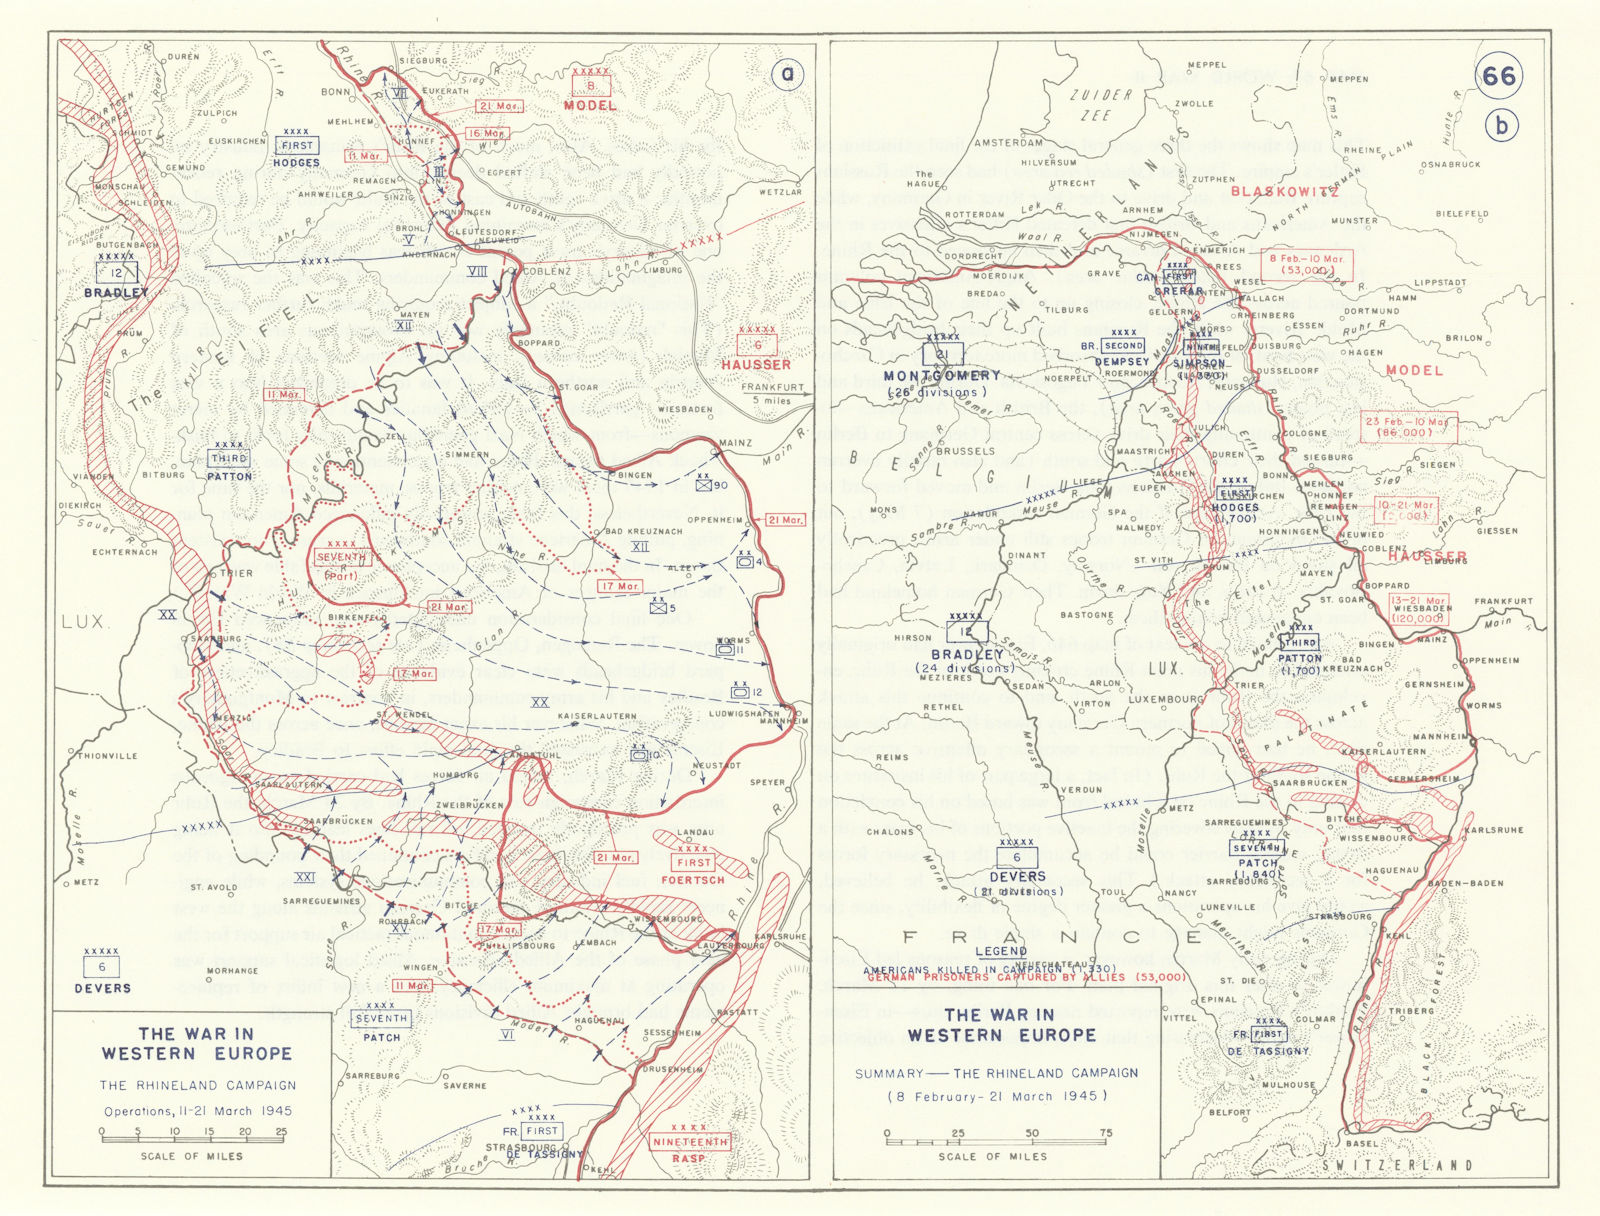 World War 2. Western Front 8 February-21 March 1945. Rhineland Campaign 1959 map